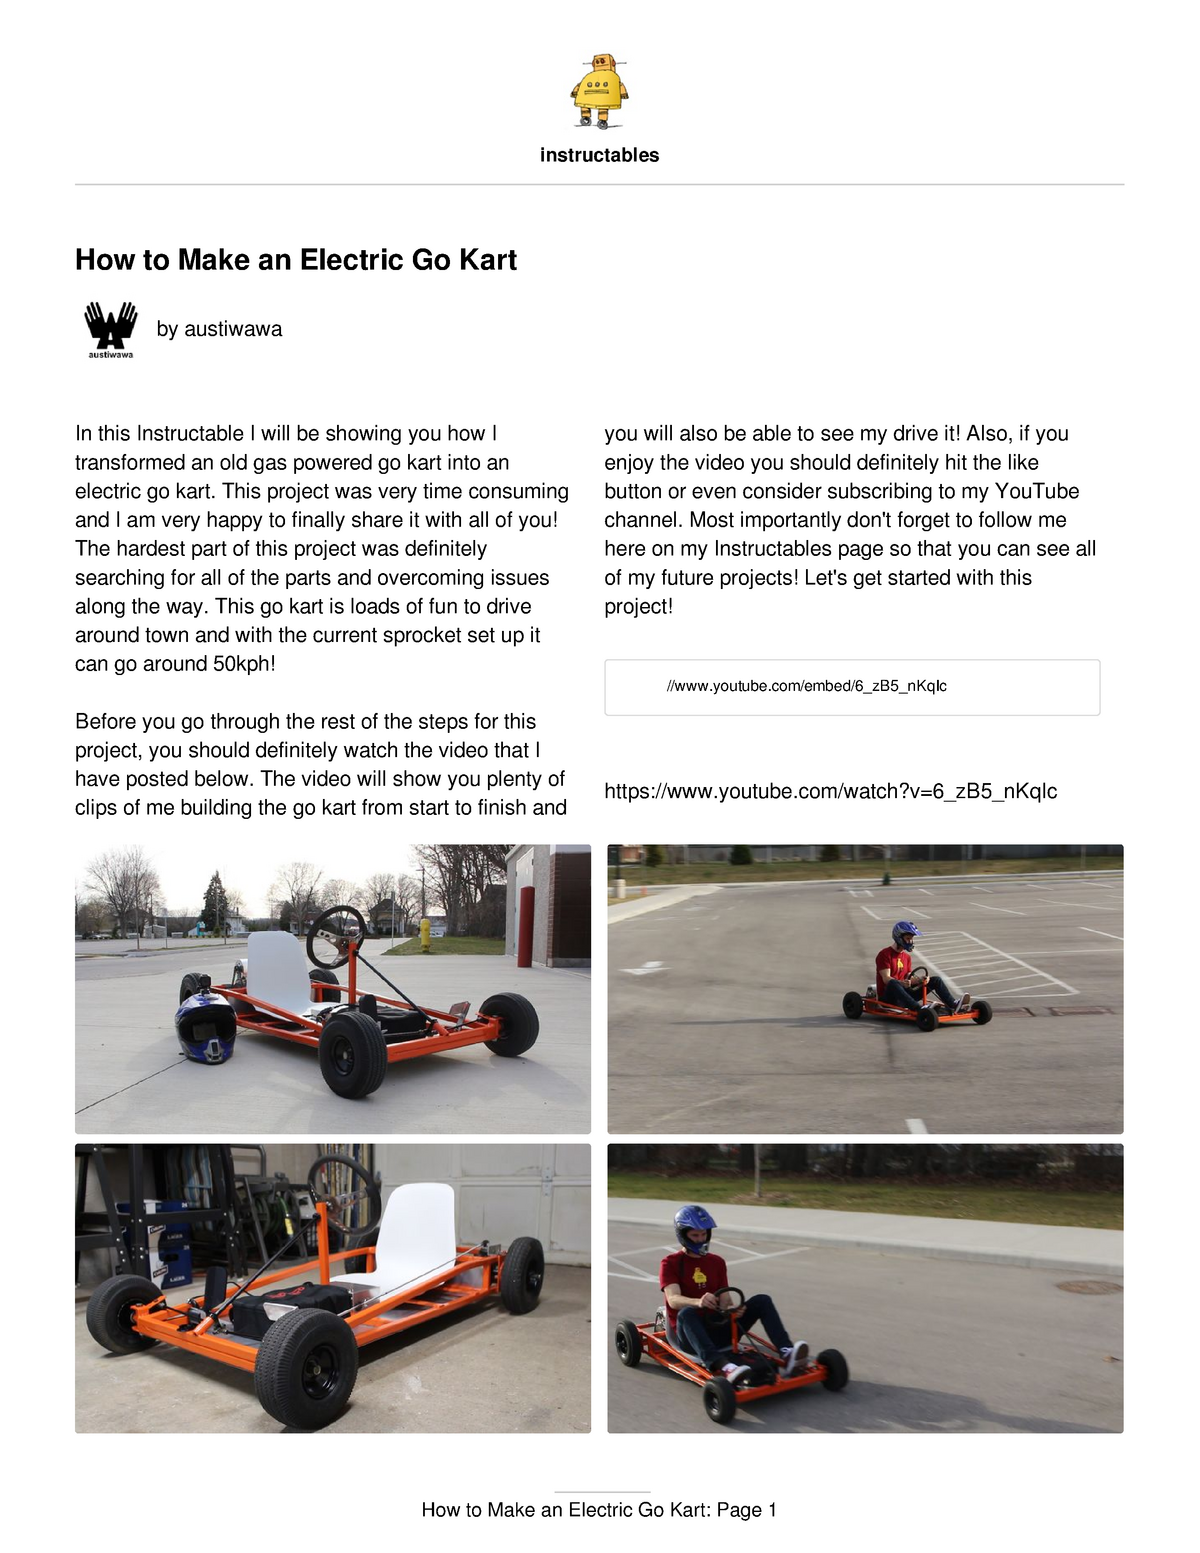 How to Make an Electric Go Kart 1 - This project was very time